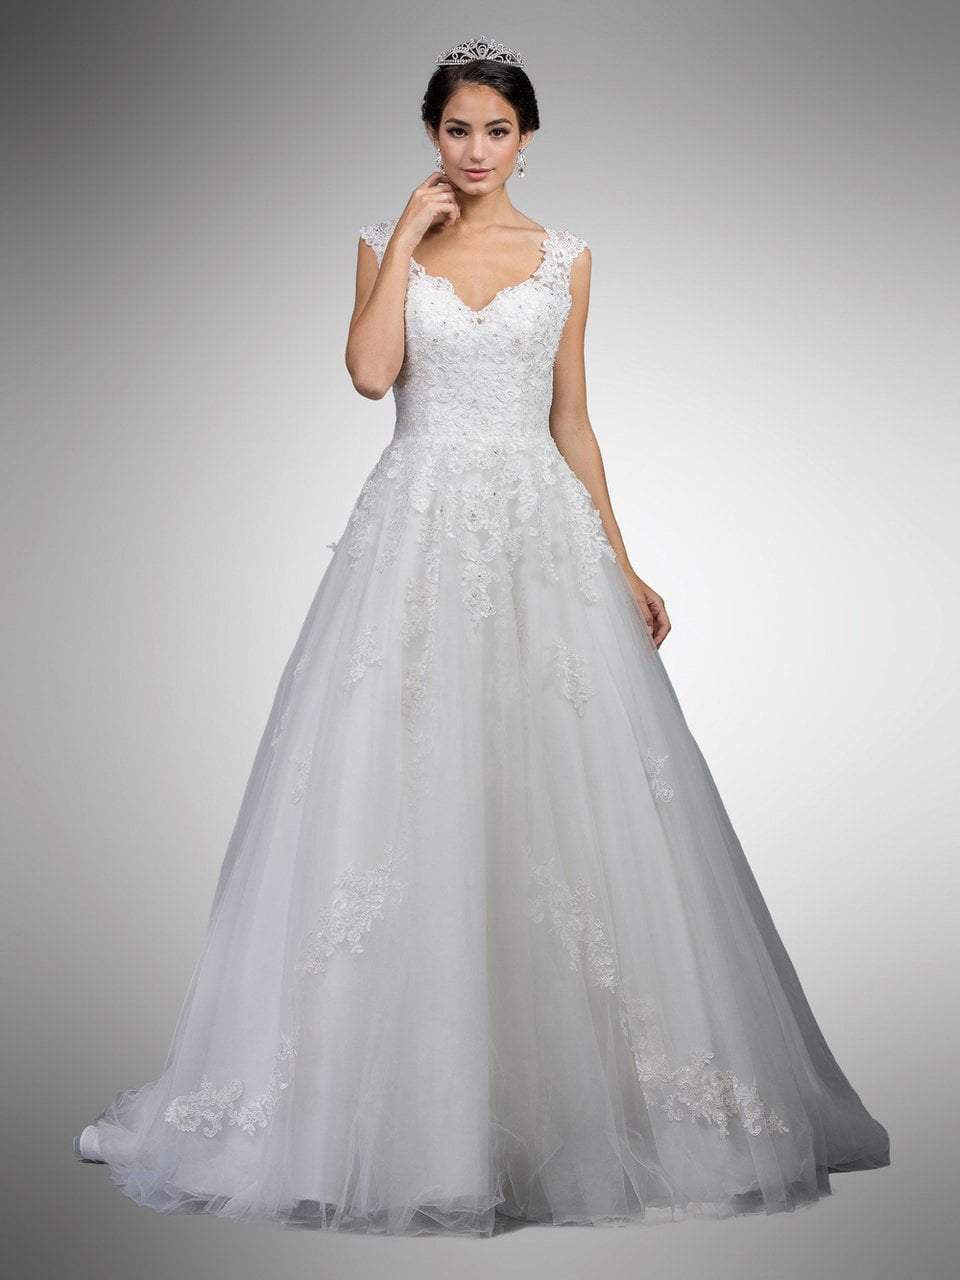 Dancing Queen Bridal - 19 Lace Embroidered V-neck Ballgown
